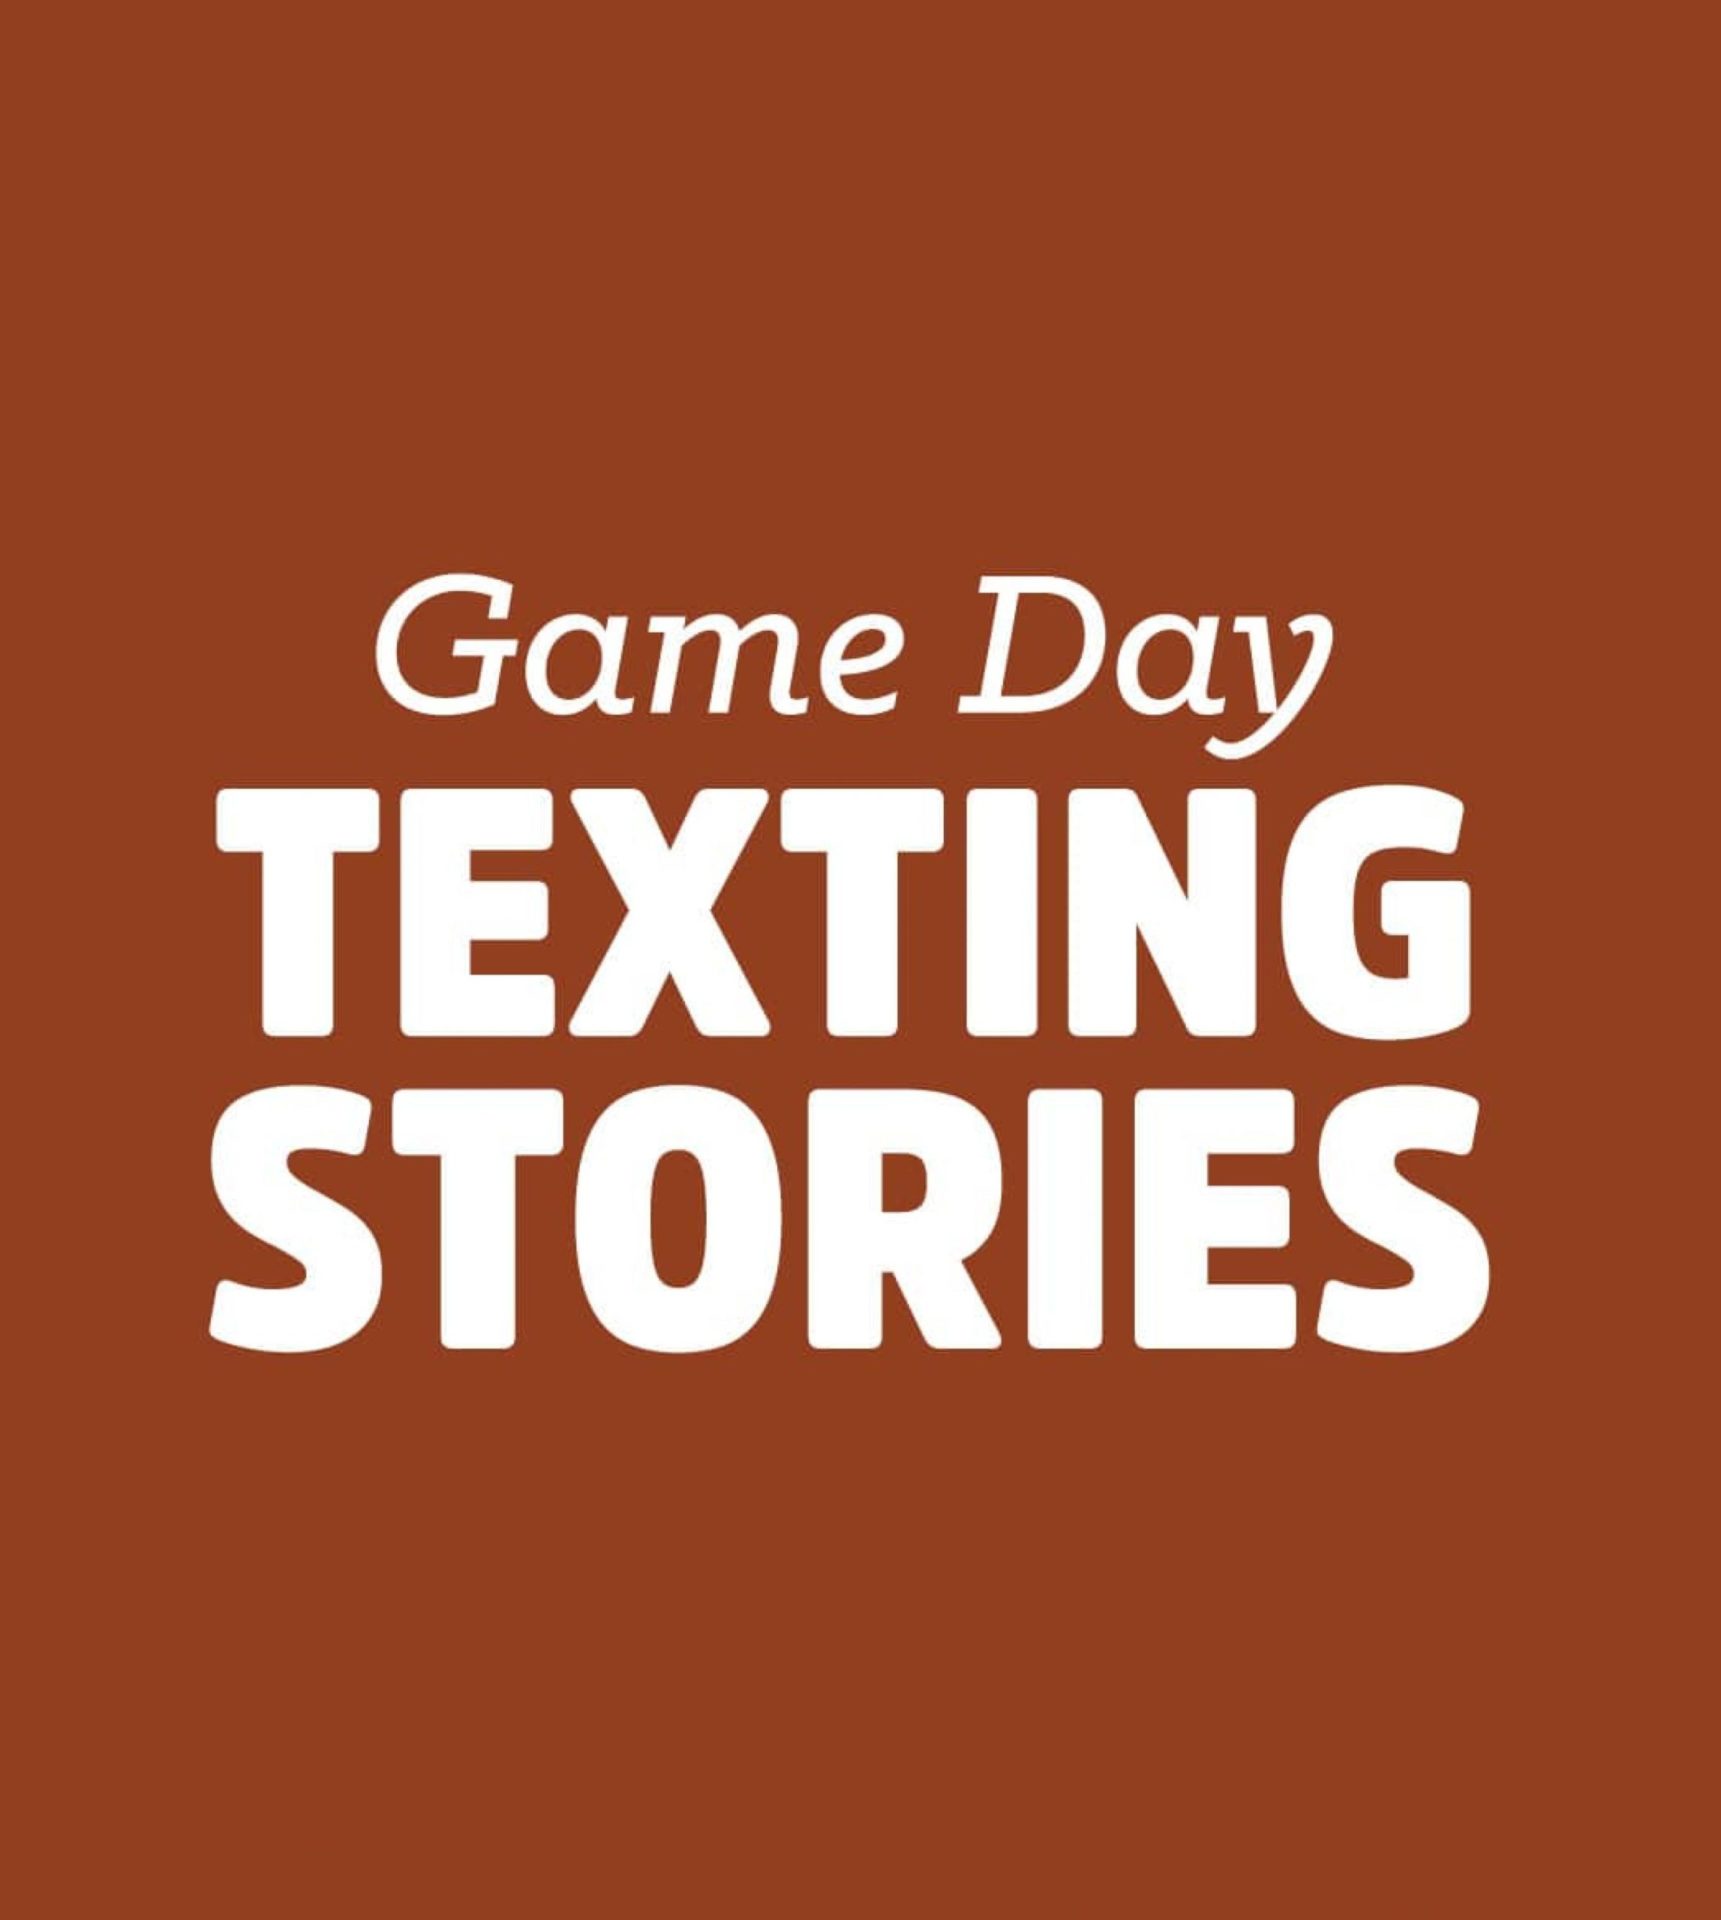 Game Day TEXTING STORIES